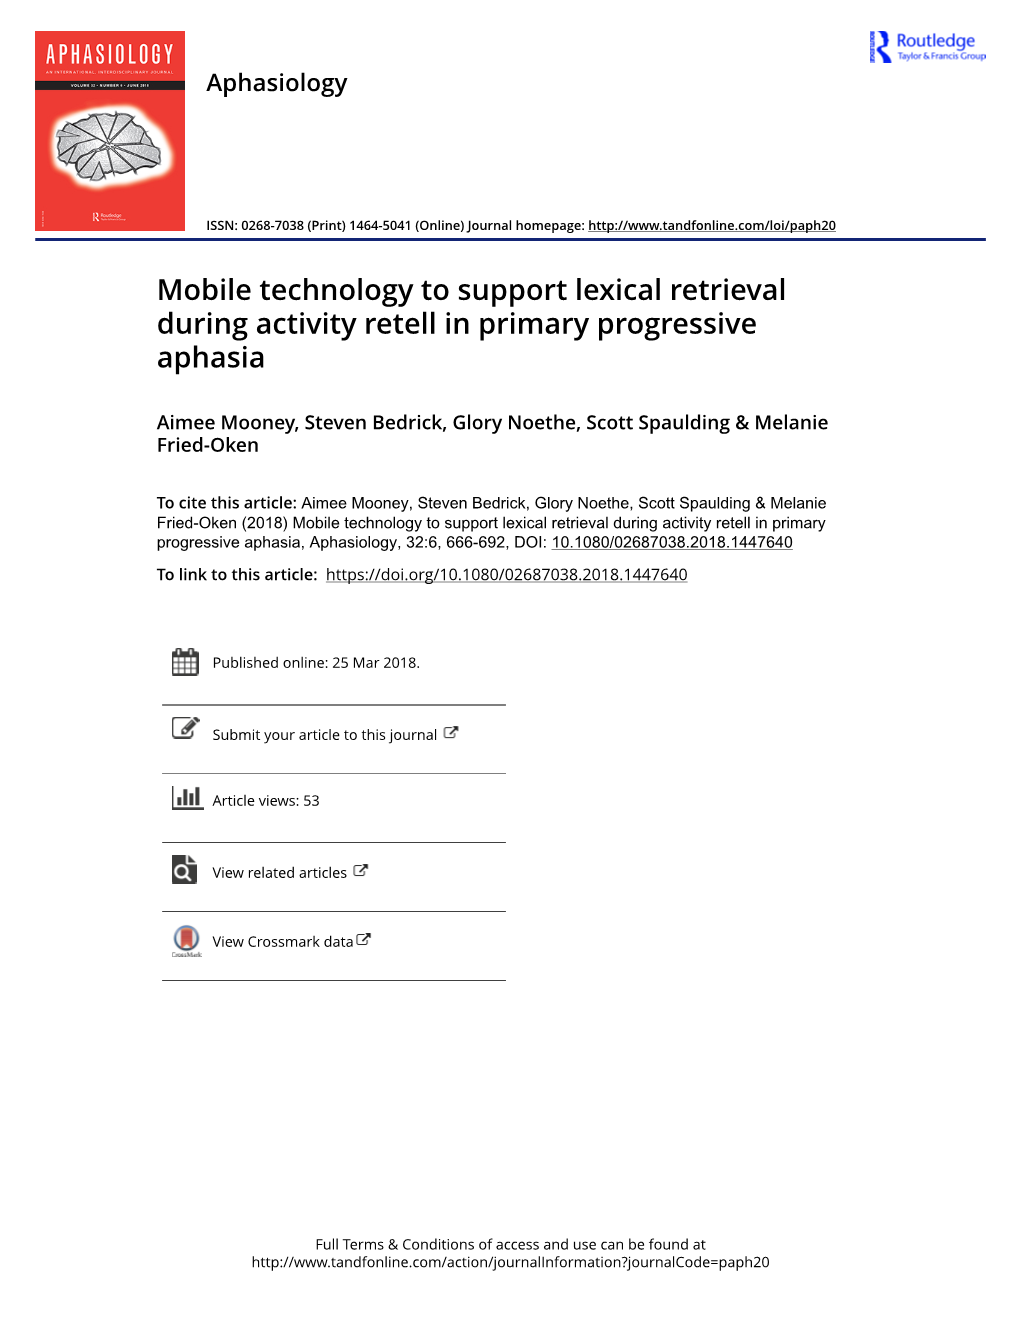 Mobile Technology to Support Lexical Retrieval During Activity Retell in Primary Progressive Aphasia